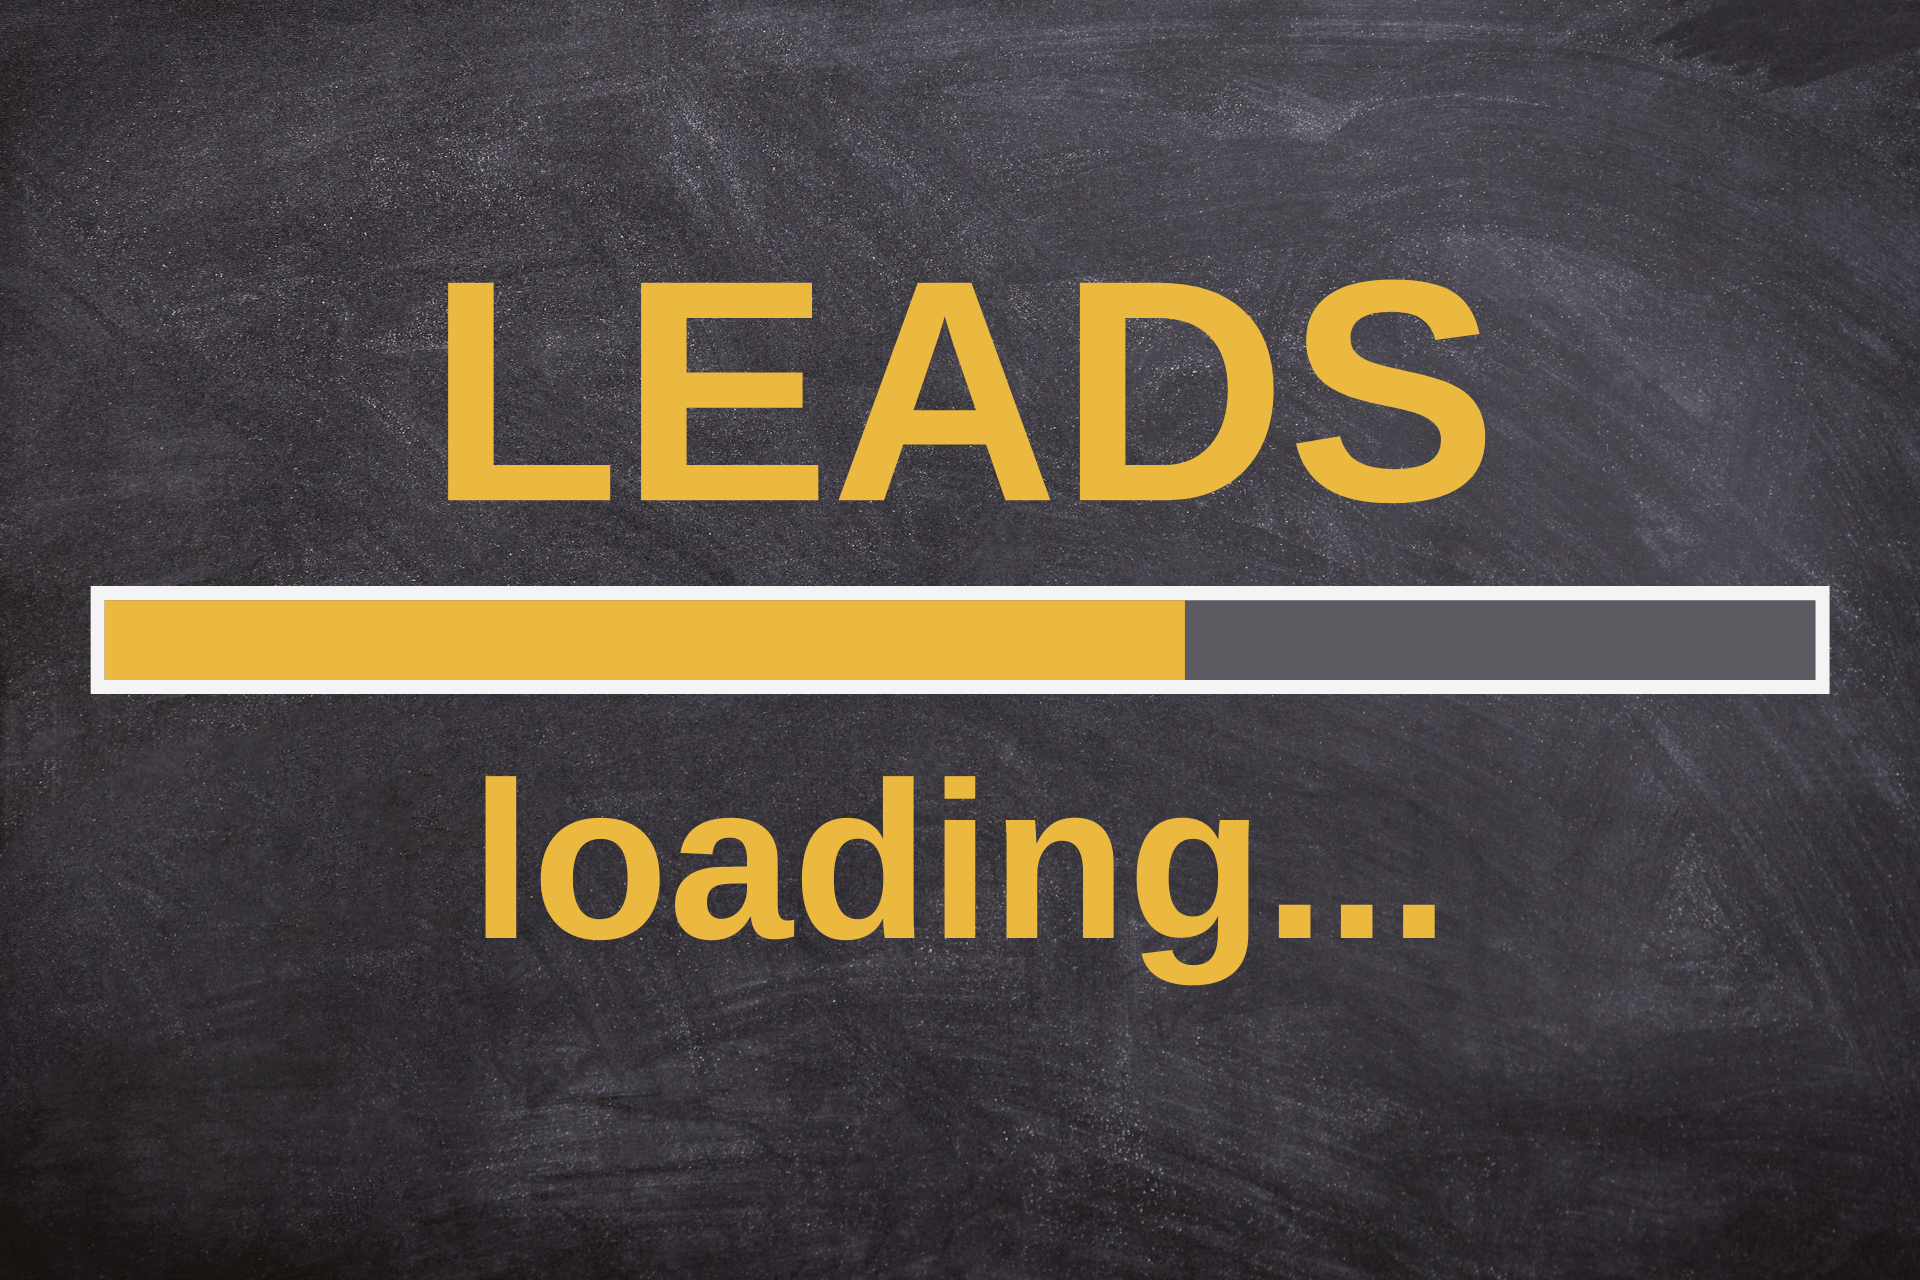 Lead Generation in 2022: Why Haven’t We Fixed This Yet? - Featured Image